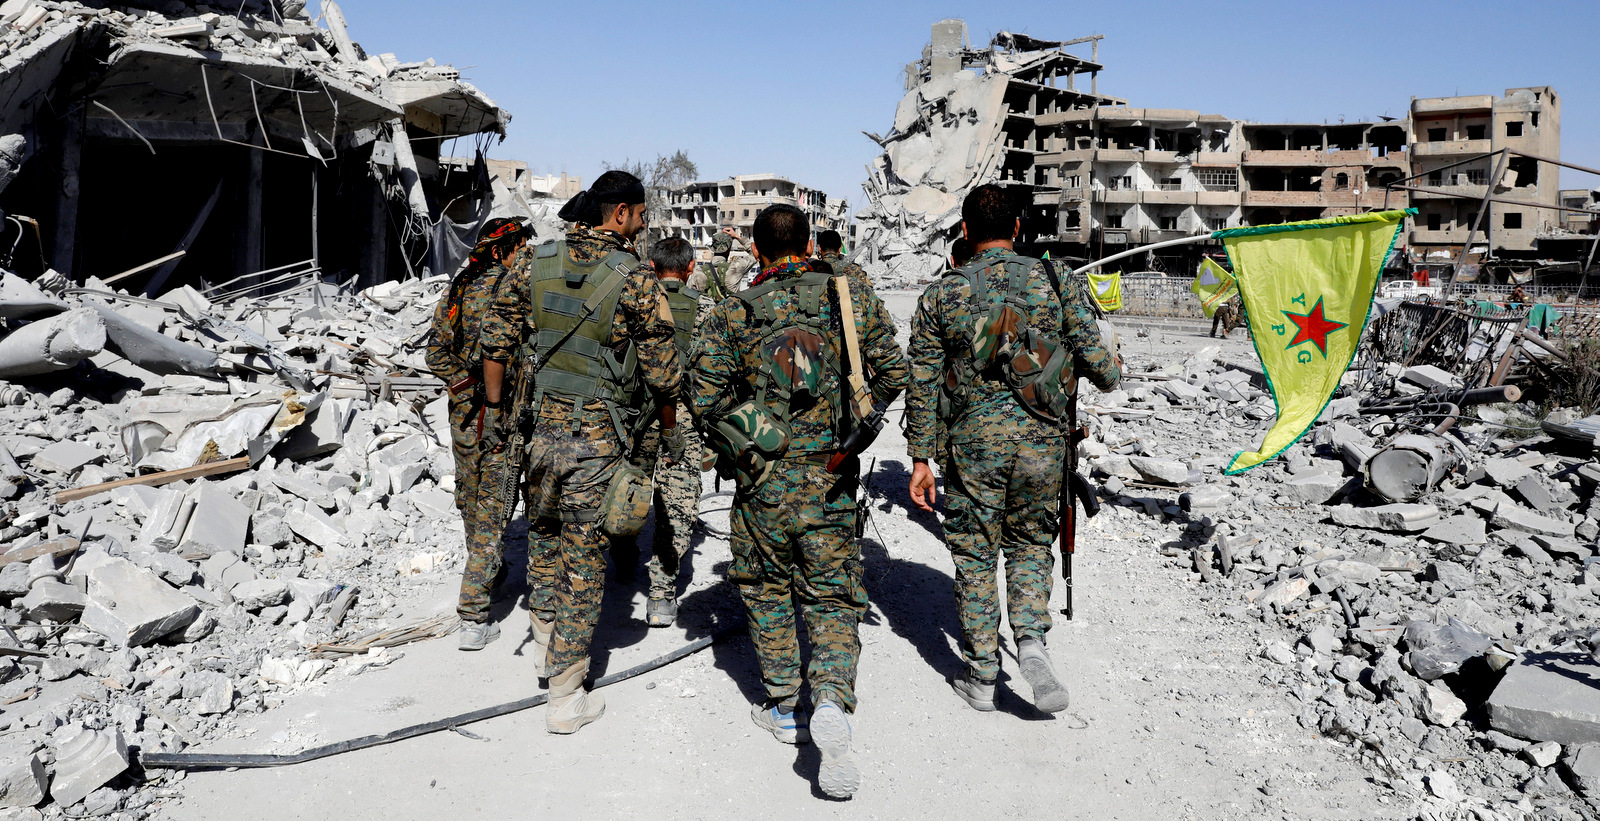 Syrian Democratic Forces Fighters walk past the ruins of destroyed buildings near the National Hospital after Raqqa was liberated from the Islamic State (ISIS), in Raqqa, Syria October 17, 2017. (Erik De Castro/Reuters)